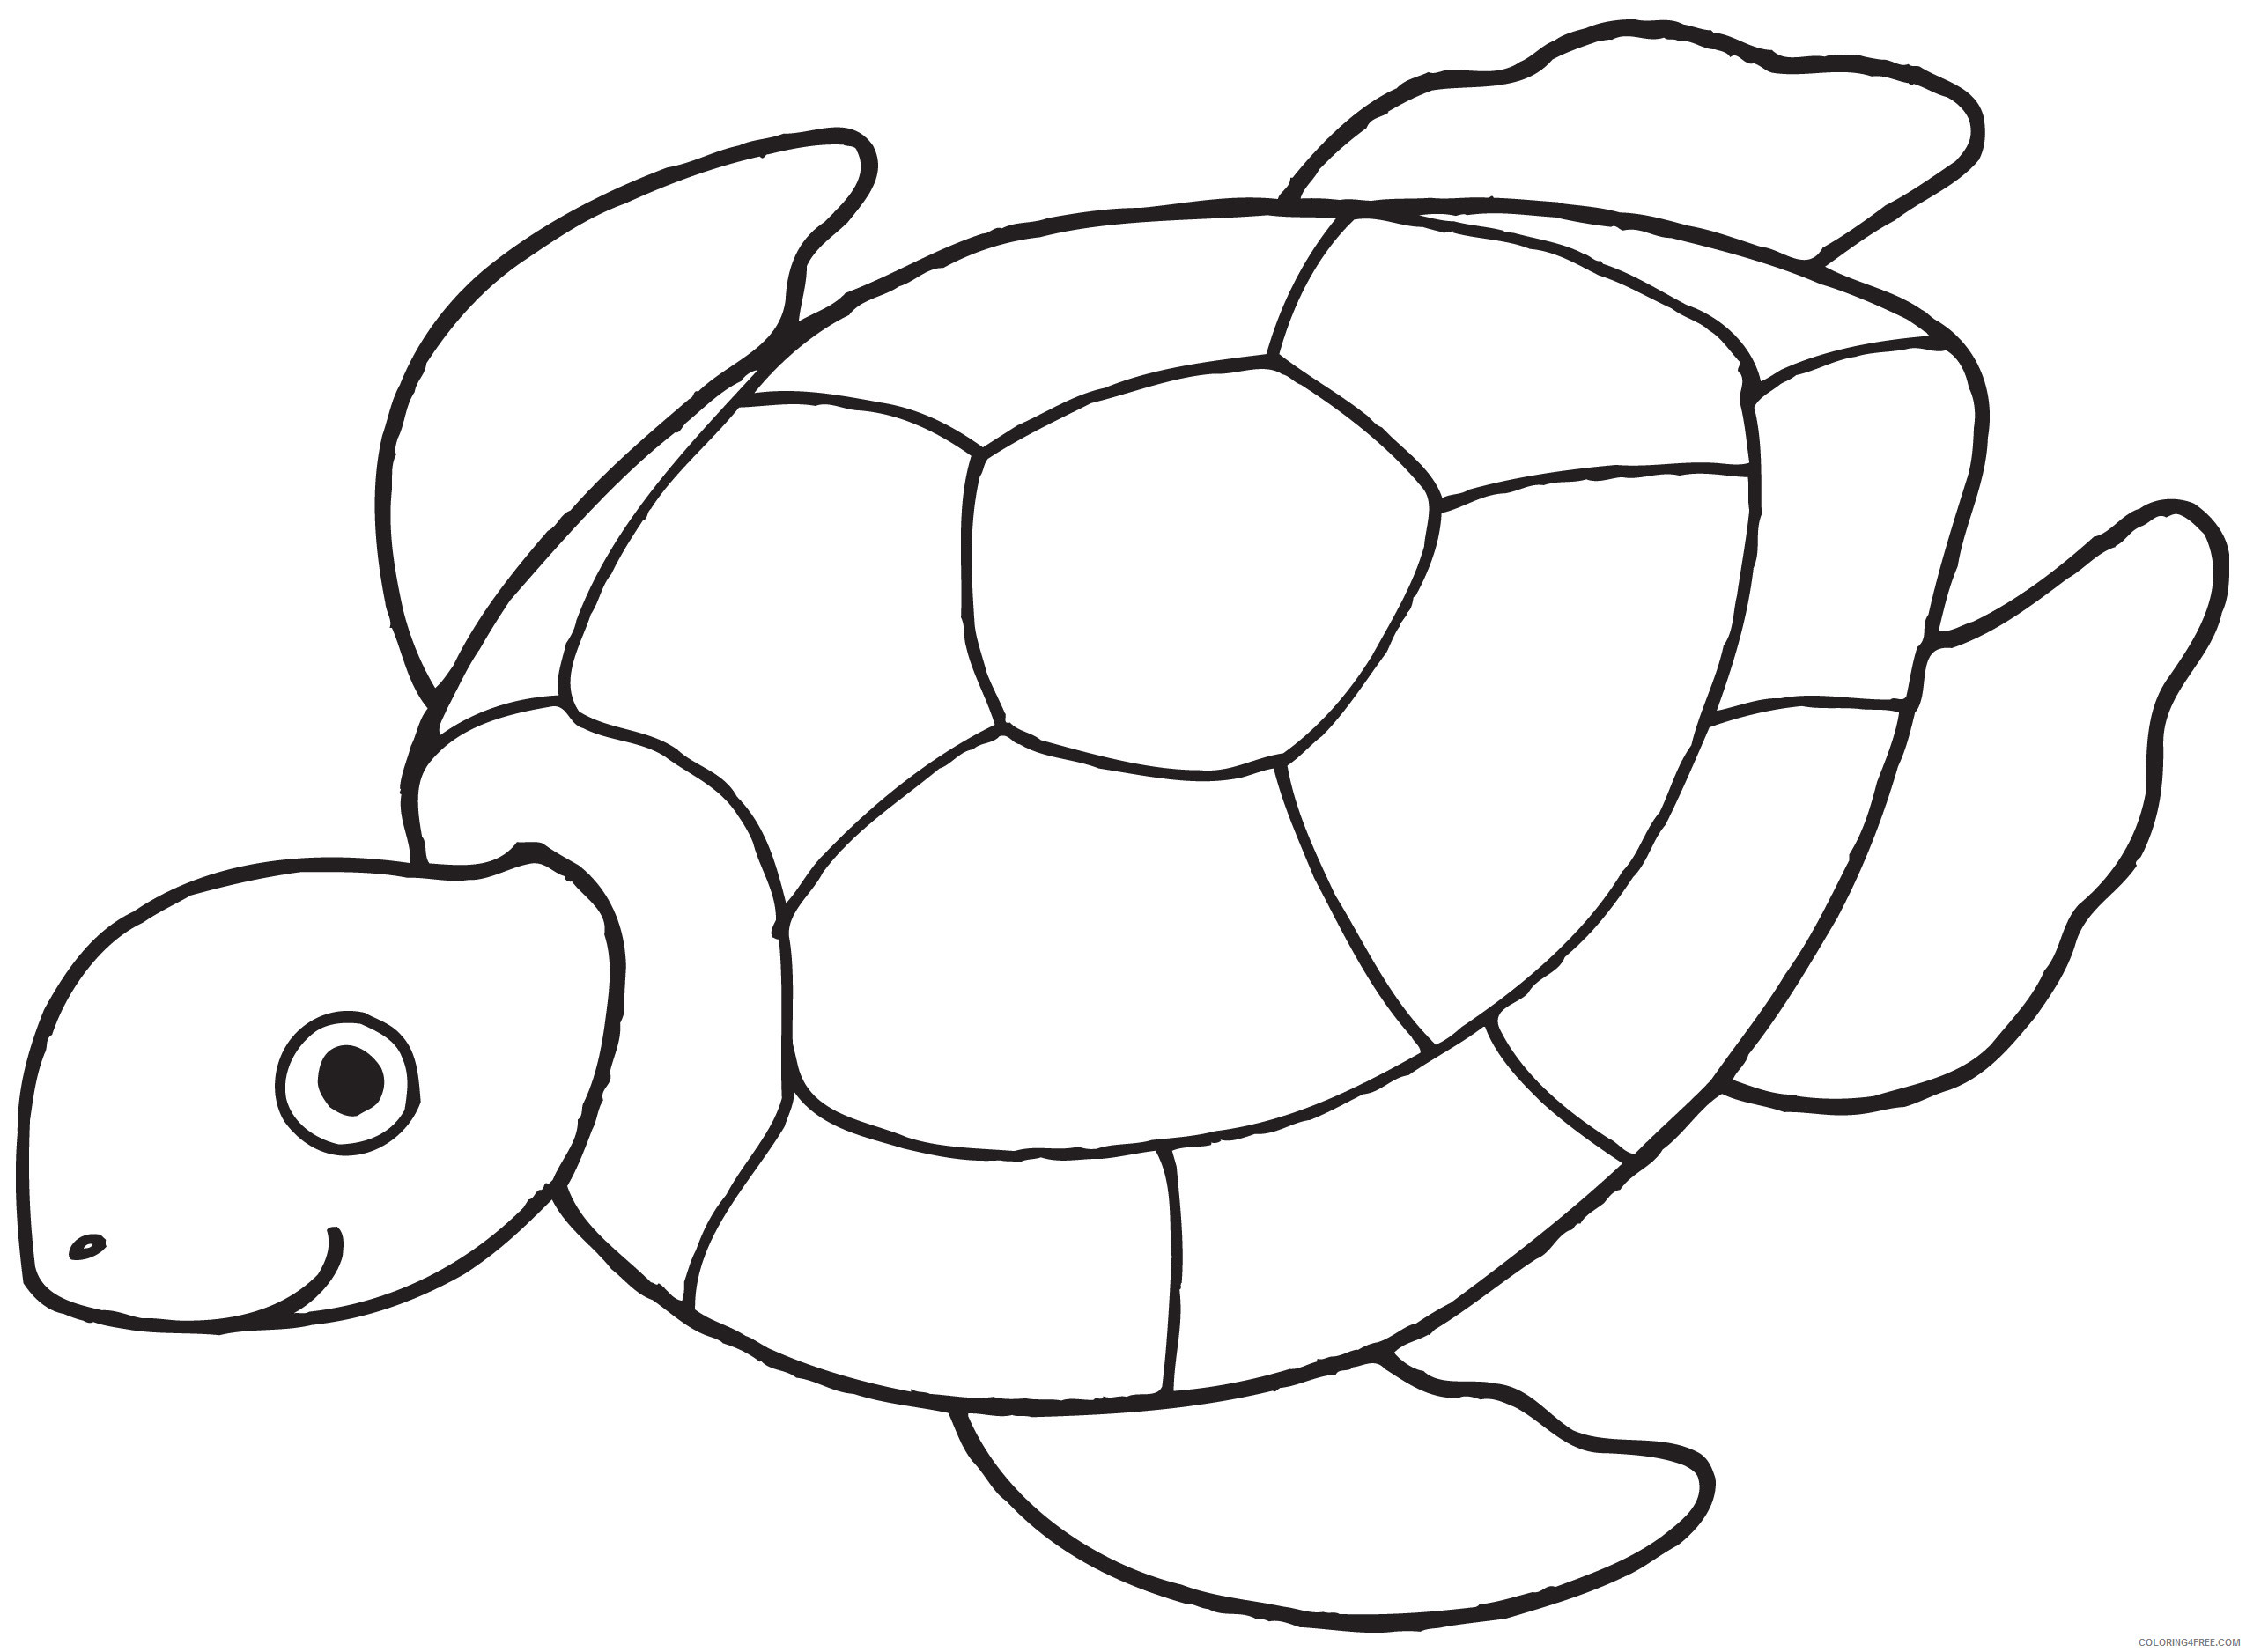 Turtle Outline Coloring Pages turtle 11 jpg Printable Coloring4free